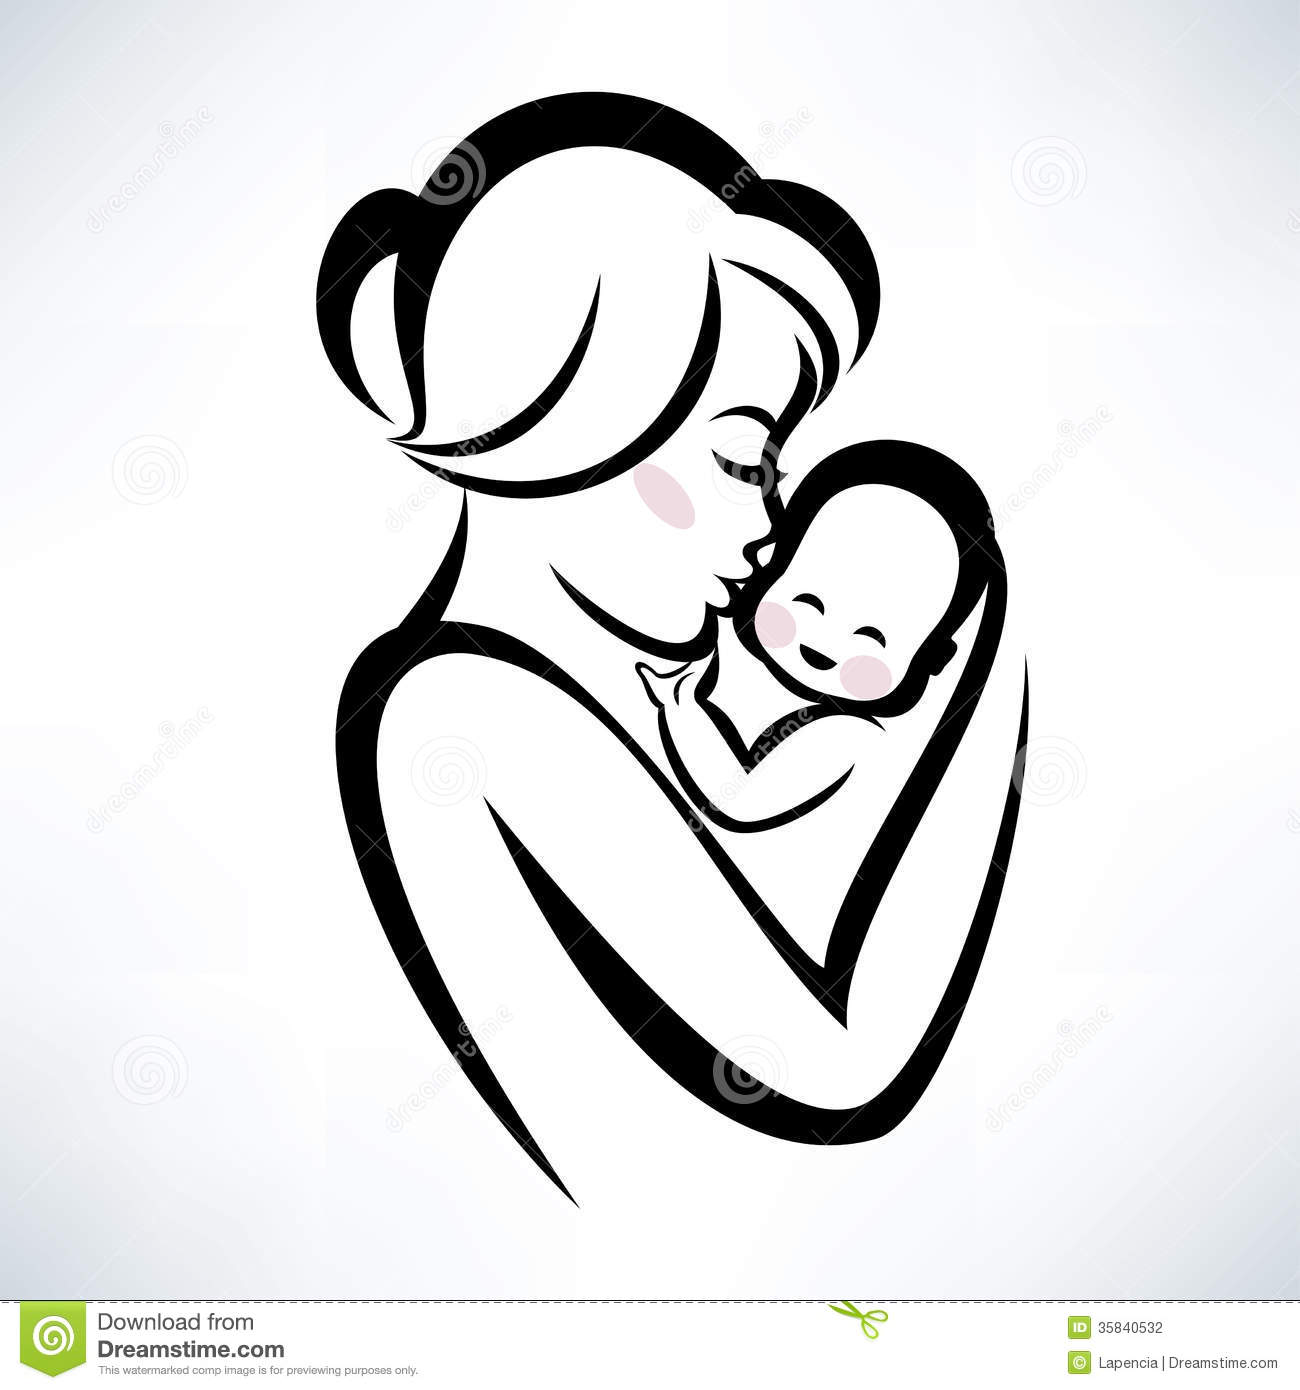 ... Mother and baby - Vector 